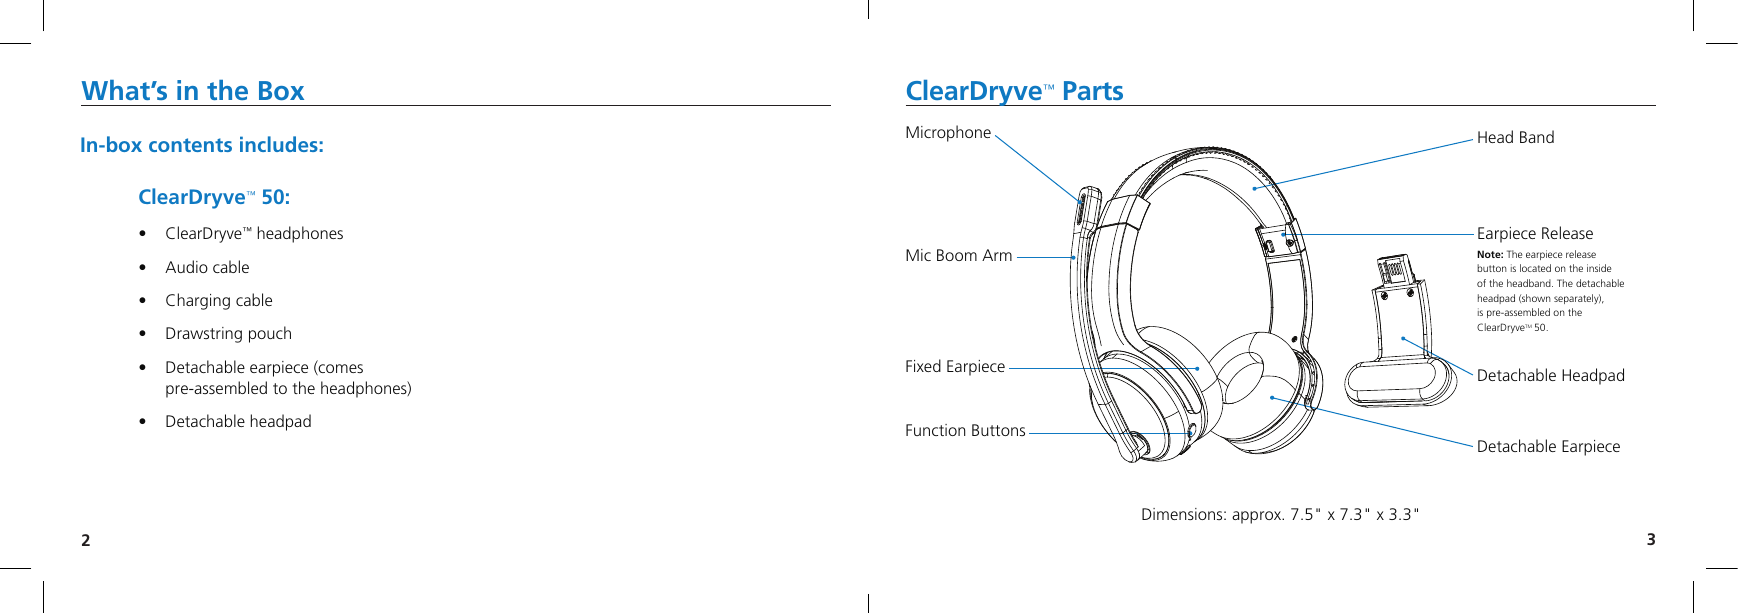 23What’s in the Box ClearDryve™ Parts In-box contents includes:ClearDryve™ 50:• ClearDryve™ headphones• Audio cable• Charging cable• Drawstring  pouch• Detachable earpiece (comespre-assembled to the headphones)• Detachable  headpadMicrophoneMic Boom ArmFixed EarpieceFunction ButtonsHead BandEarpiece ReleaseNote: The earpiece release button is located on the inside  of the headband. The detachable headpad (shown separately),  is pre-assembled on the  ClearDryveTM 50.Detachable HeadpadDetachable EarpieceDimensions: approx. 7.5&quot; x 7.3&quot; x 3.3&quot;